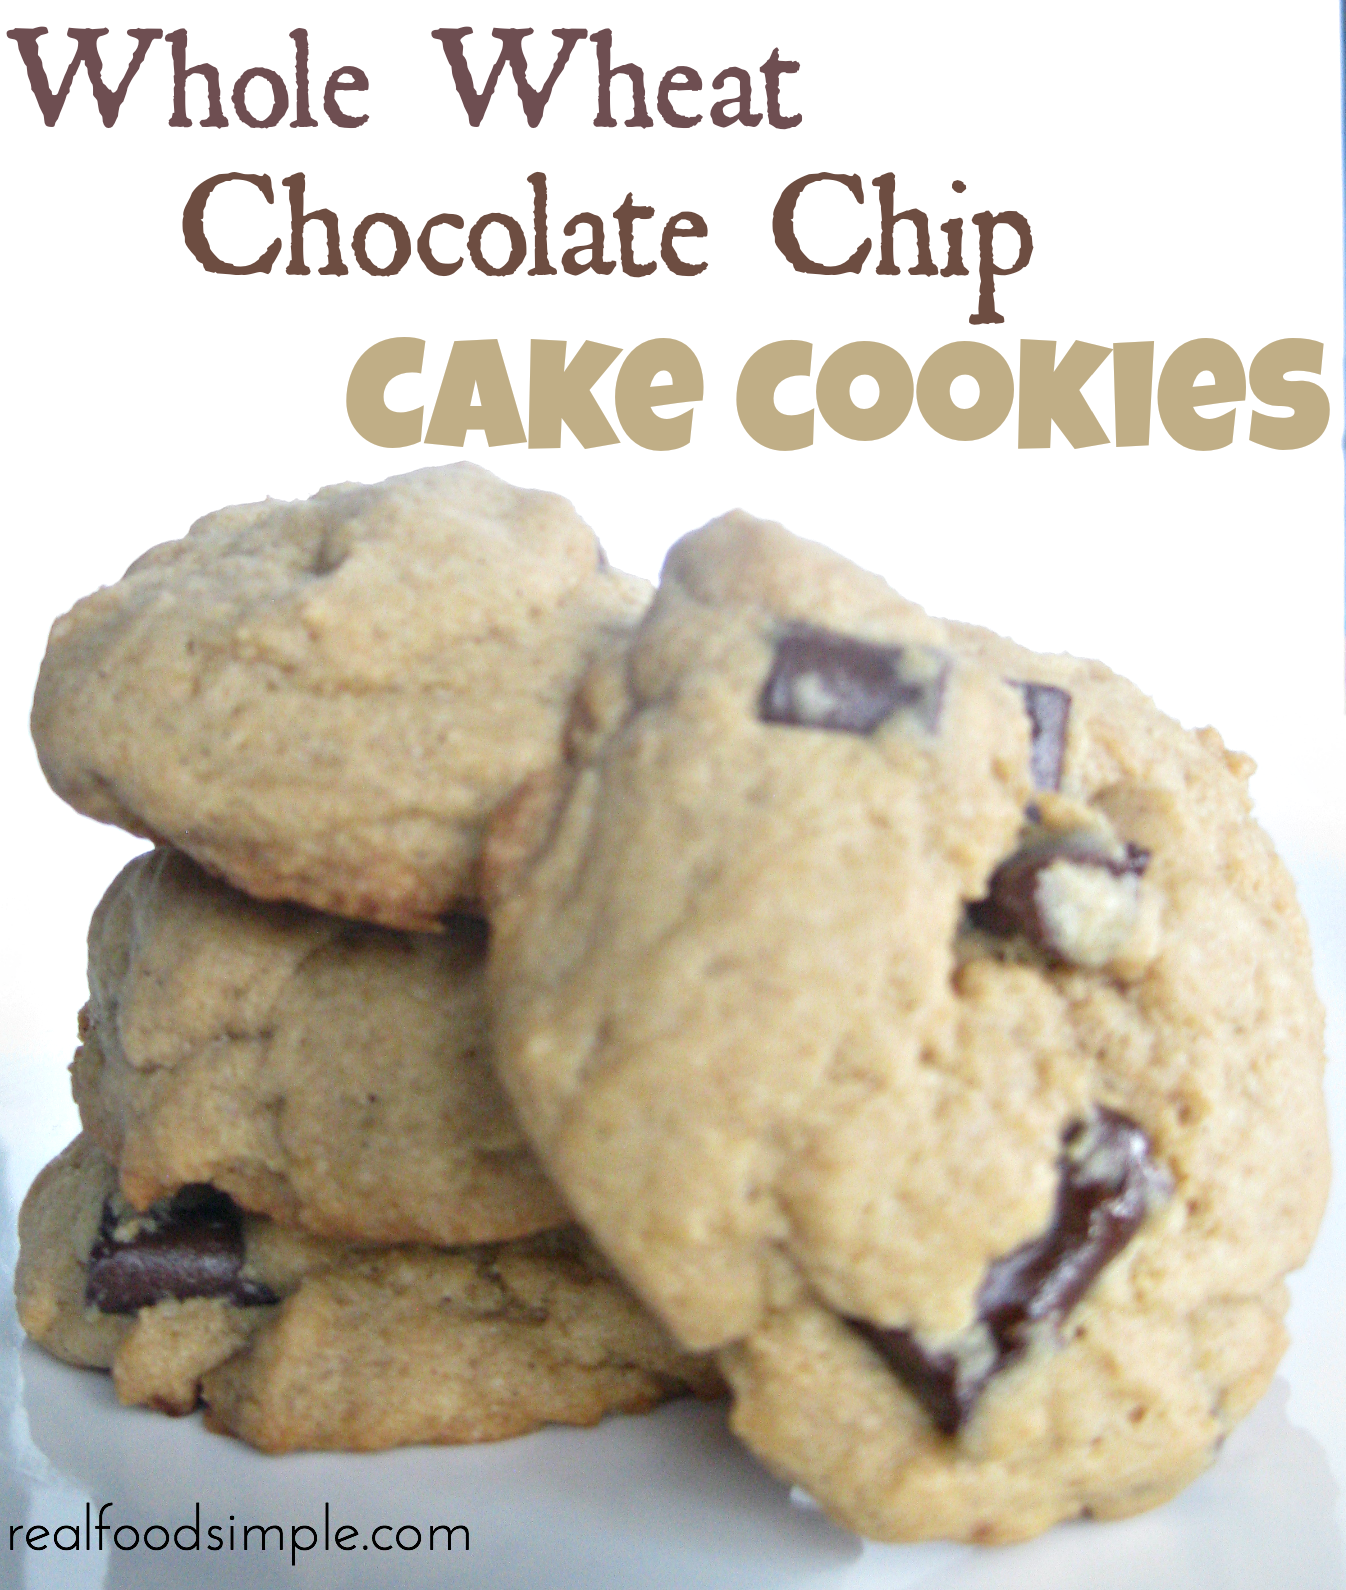 whole wheat chocolate chip cake cookies. These cookies are cake-like, not overly sweet, and have the best amount of chocolate chips. | realfoodsimple.com